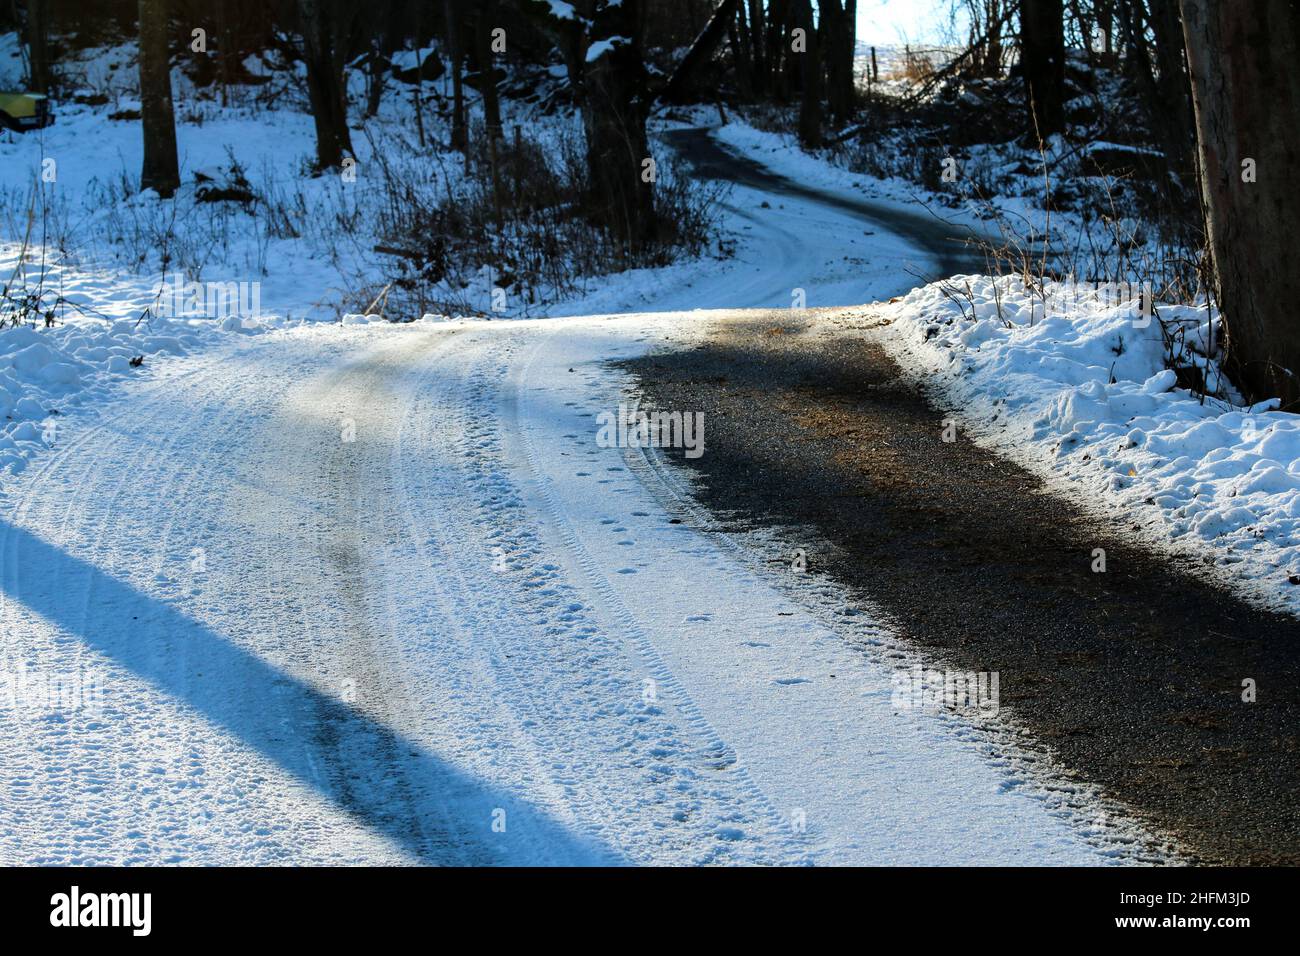 The detail of the narrow road in winter with risky driving conditions on snow and ice or black ice hiding in the shadows. Stock Photo